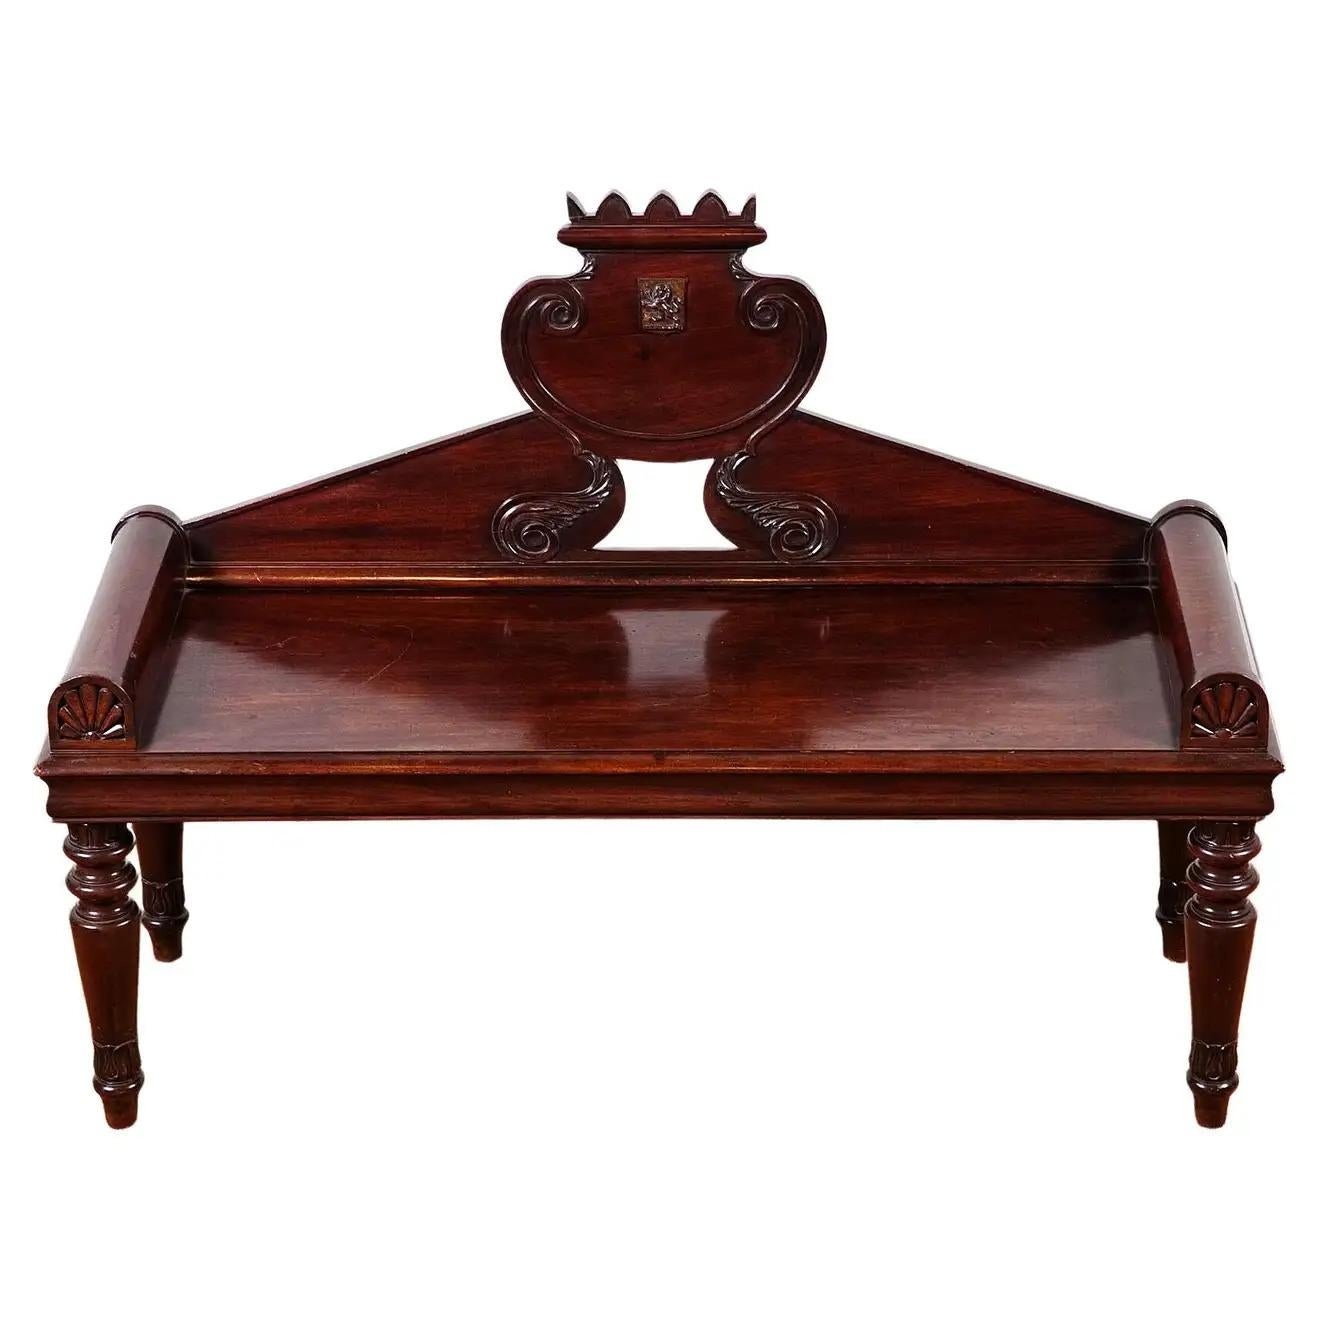 A George IV mahogany hall bench, the shield back with a castle top and central coat of arms, to a rectangular seat with roll arms carved with anthemions, resting on turned legs with lotus leaf carving.
Featured in the household furniture & interior